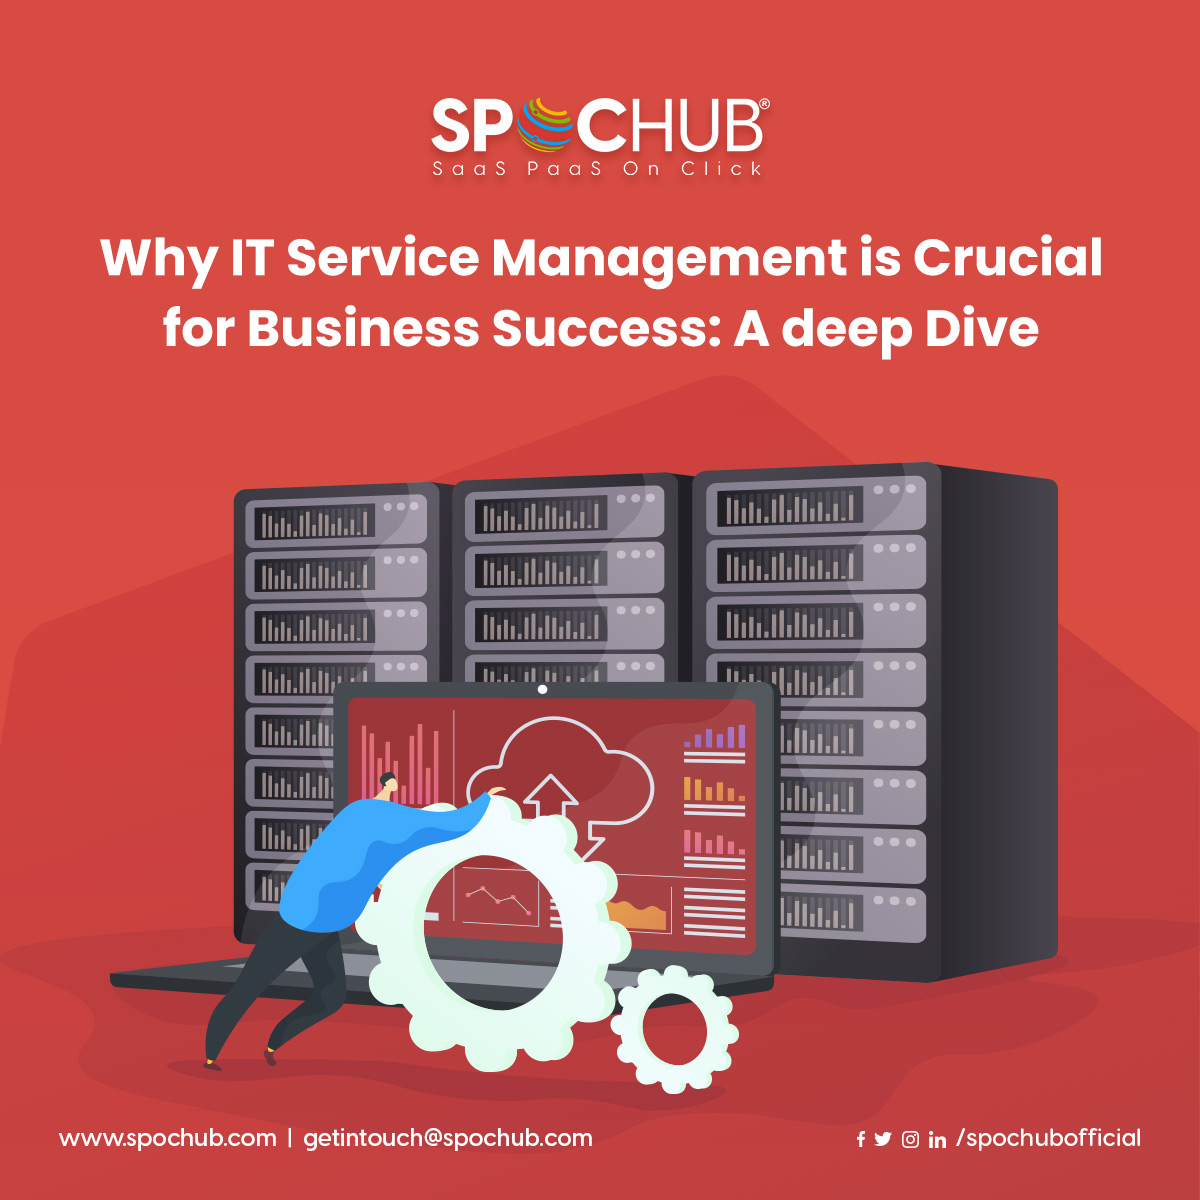 Why IT Service Management is Crucial for Business Success: A Deep Dive 🌟⚙️📈 Click out the latest blog bit.ly/42JM4hV to level up your business today. 💼🔗
.
.
.
#ITServiceManagement #BusinessSuccess #DigitalTransformation #EfficiencyBoost #BusinessGrowth #Blog #SPOCHUB